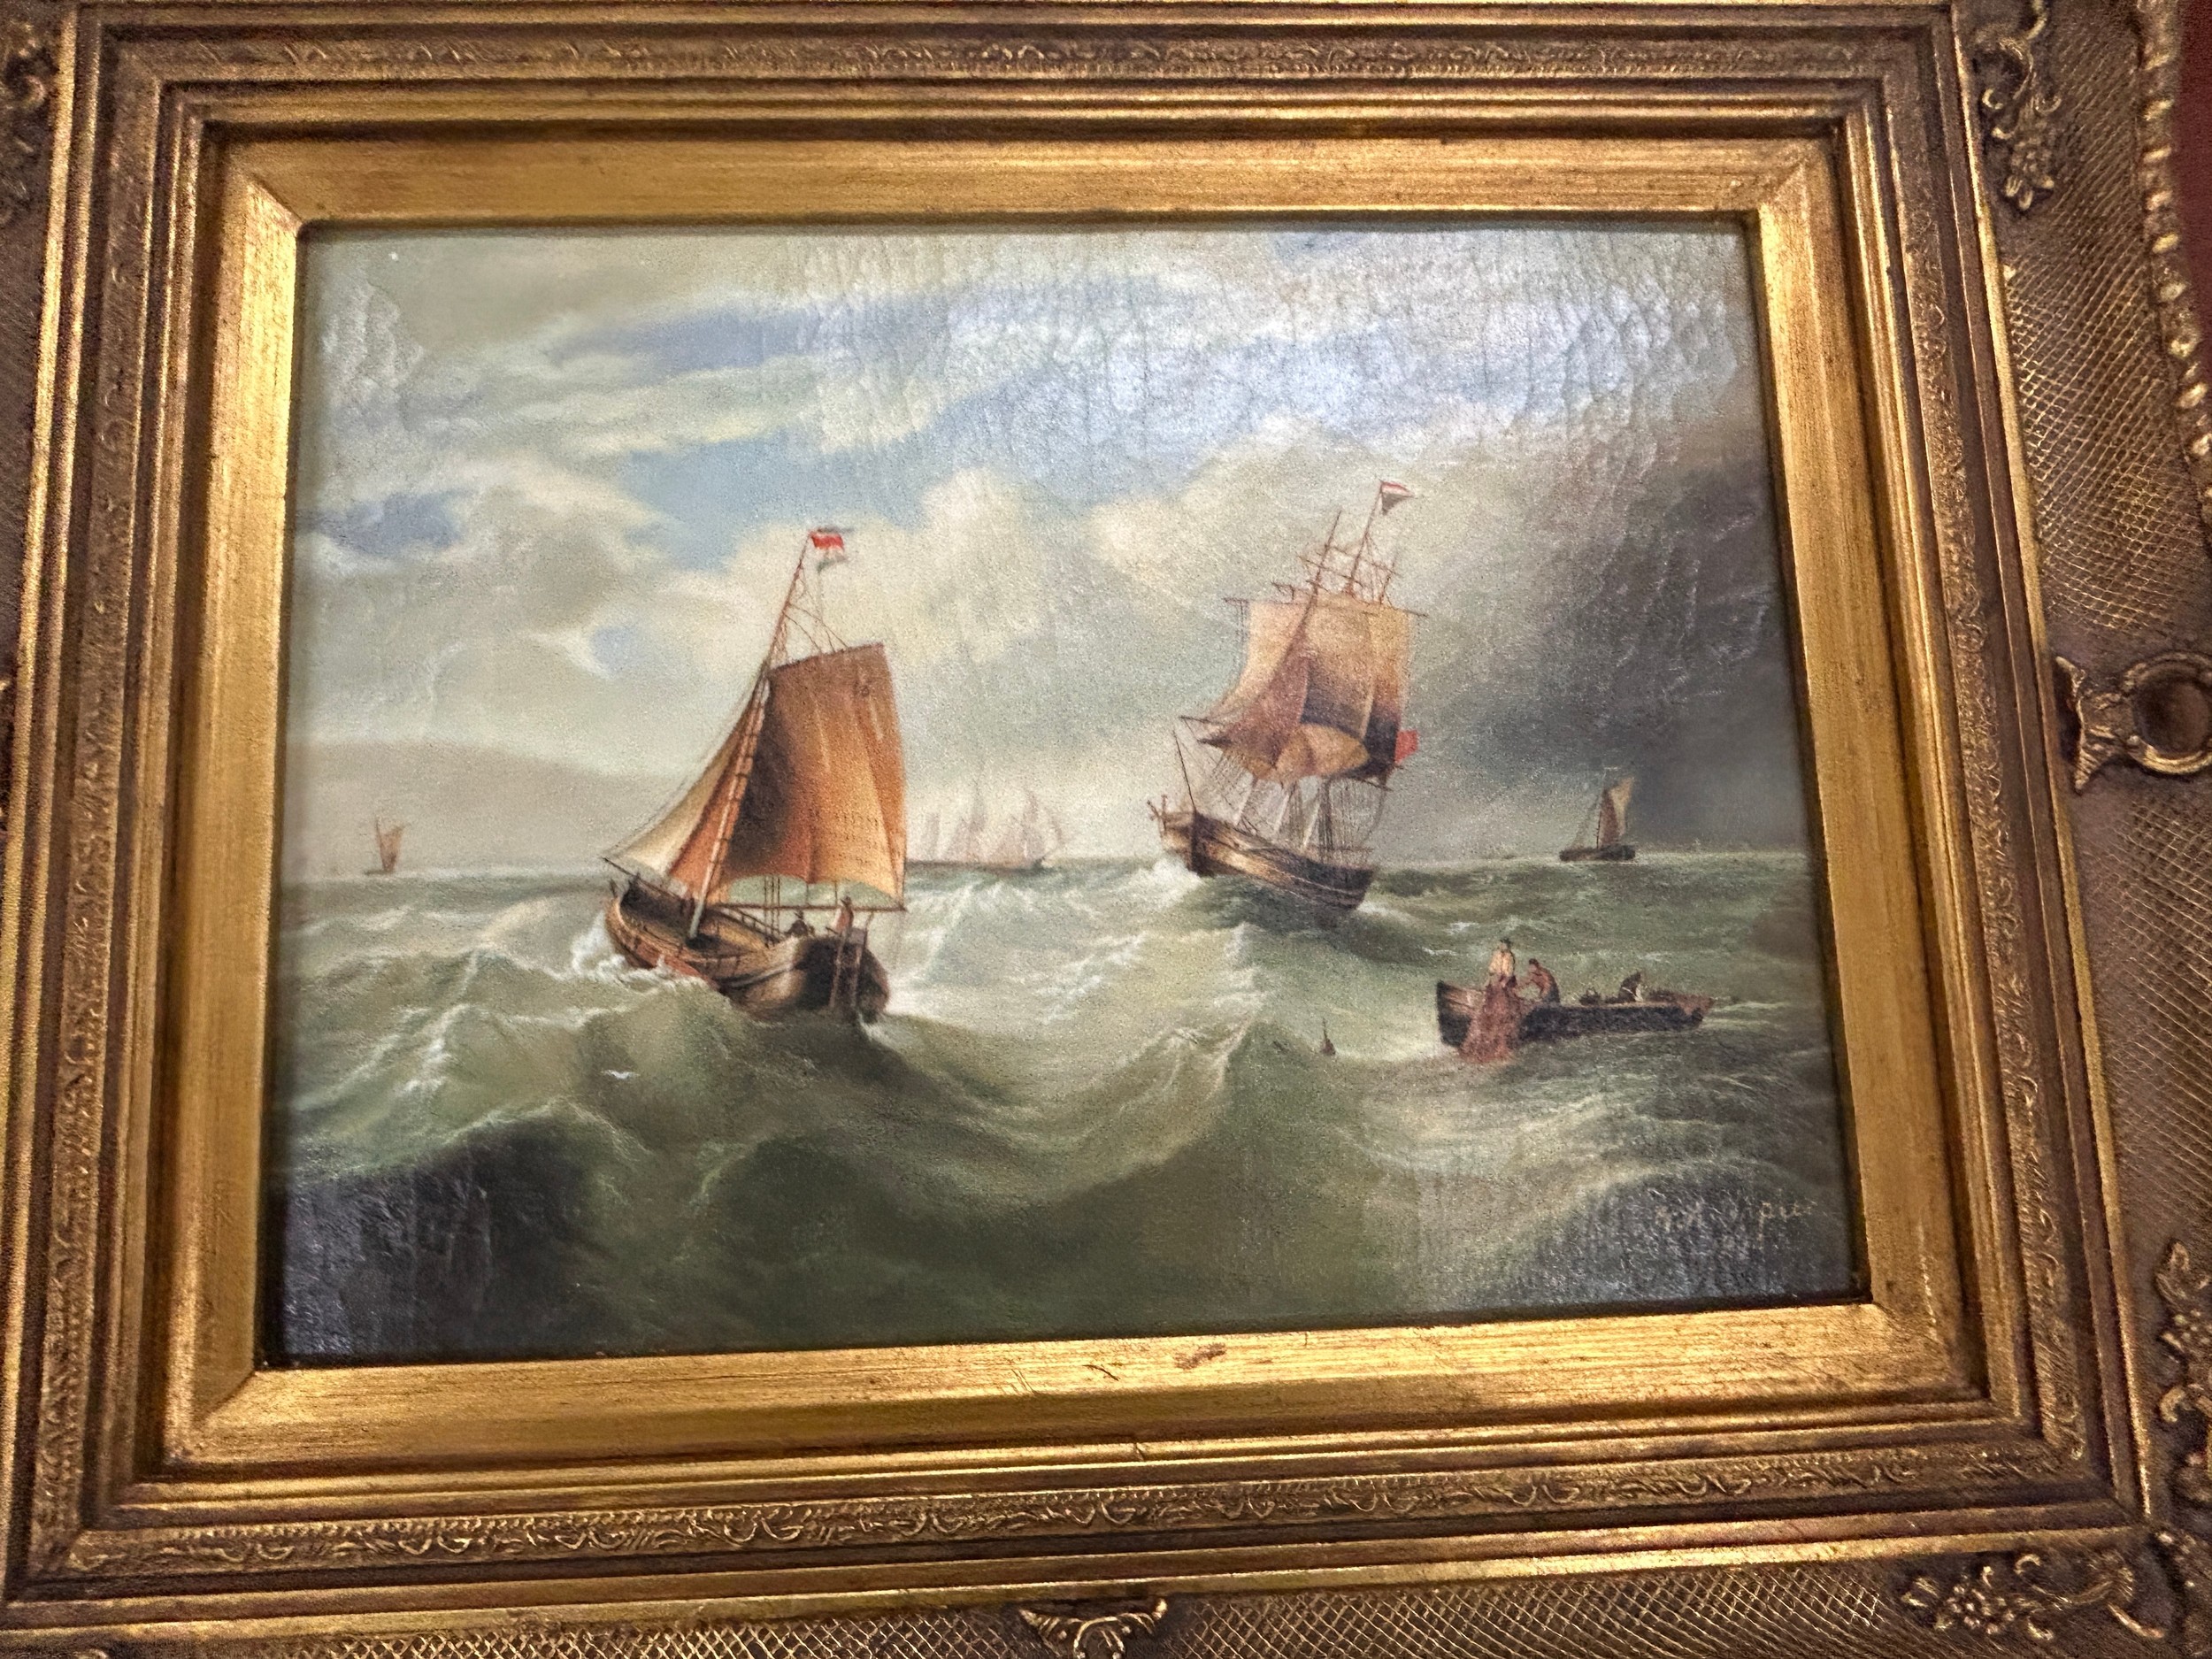 Gilt framed oil on boards depicting gallions measures approximately 24 inches tall 19 inches wide - Image 3 of 3